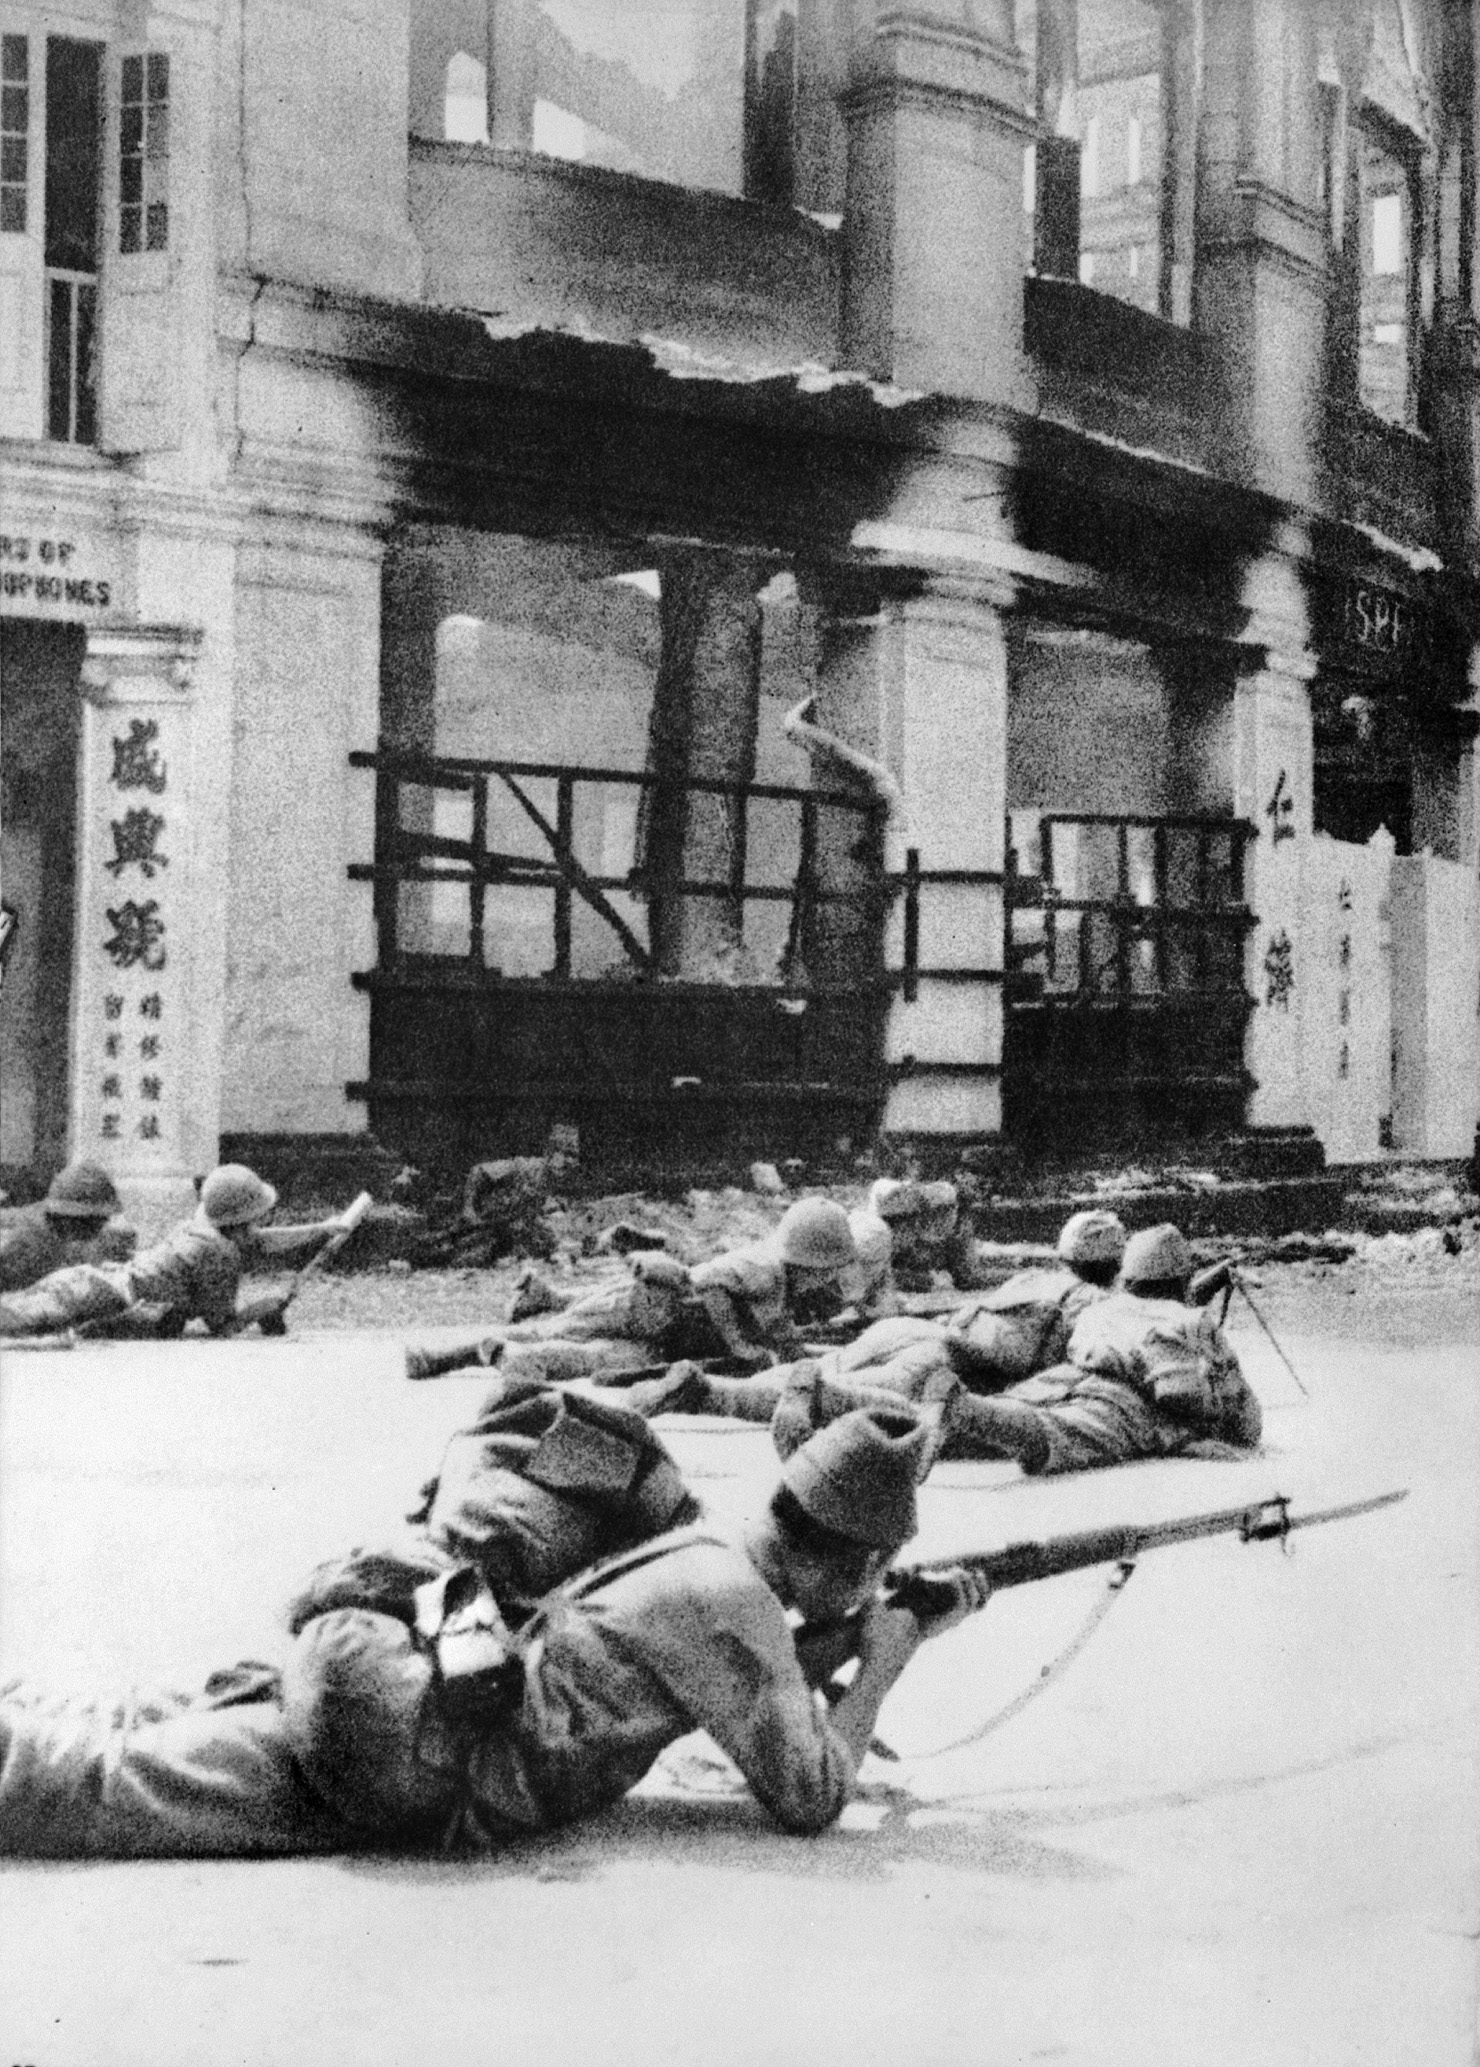 Ready to fight for control of the streets of Kuala Lumpur, Japanese soldiers take up positions on January 11, 1942. These soldiers are armed with Arisaka rifles, Nambu machine guns, and the Type 89 grenade launcher, popularly known as the “knee mortar.” 